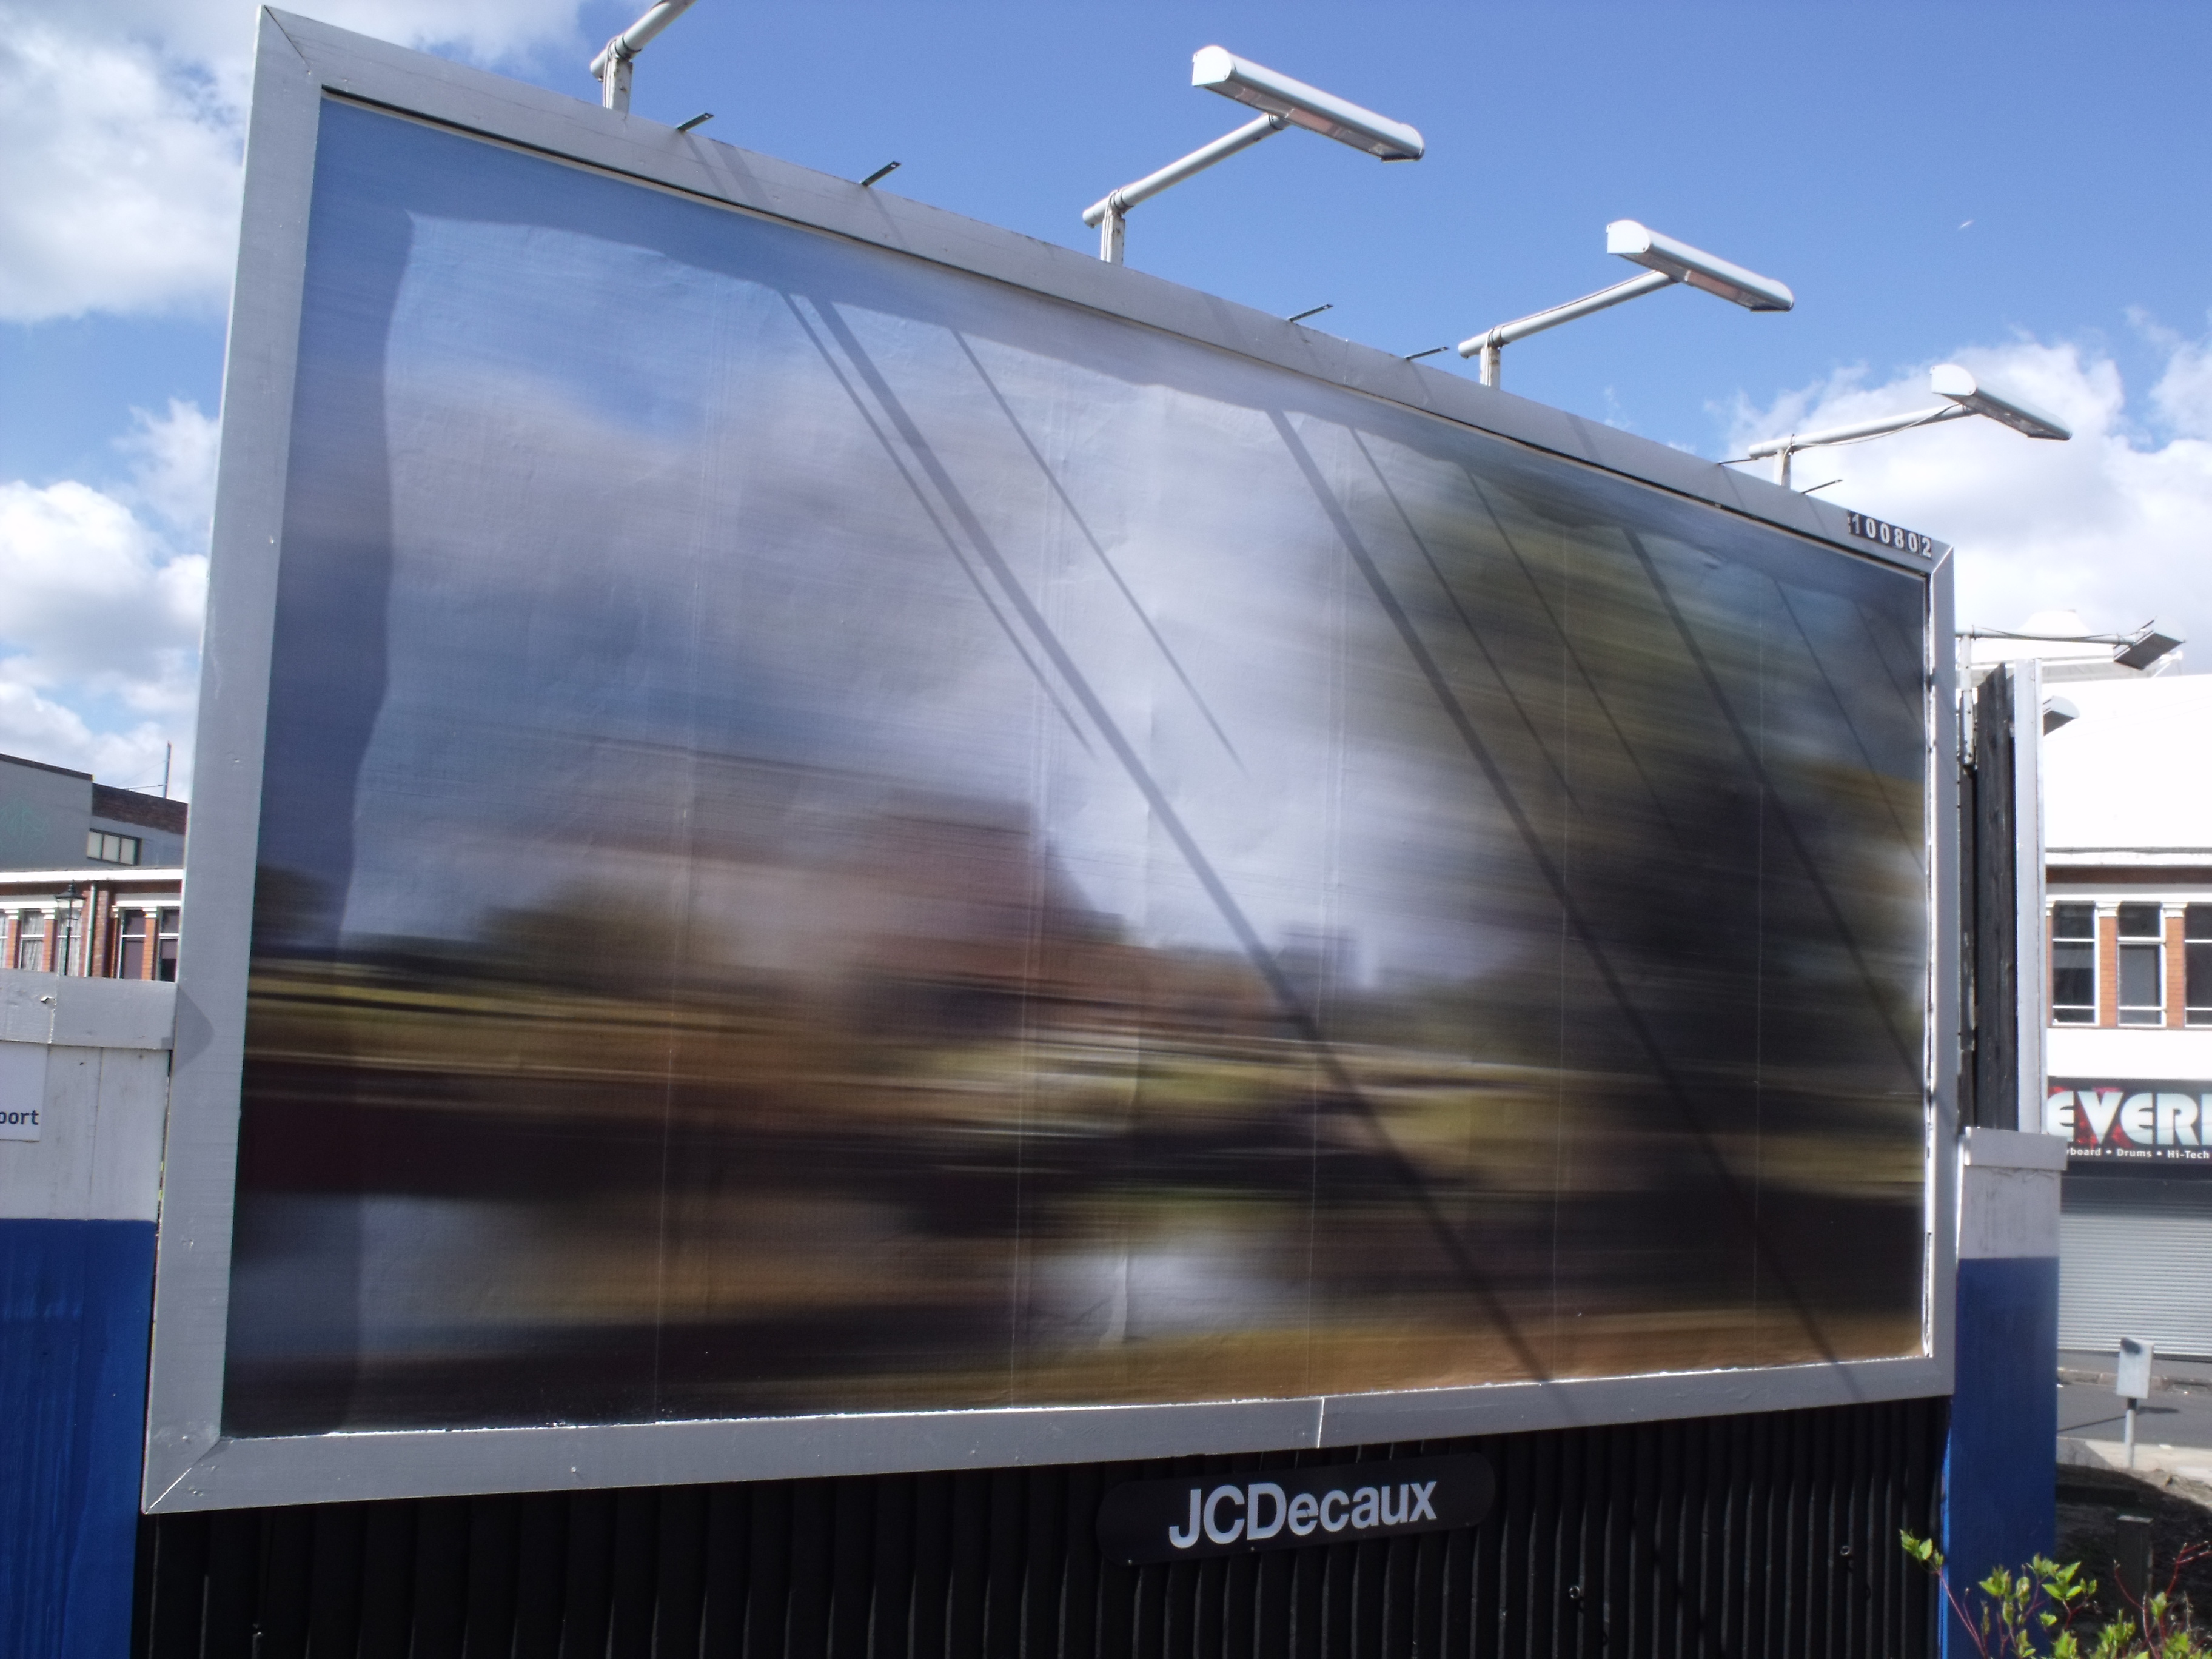 Are Billboards a Waste of Space?